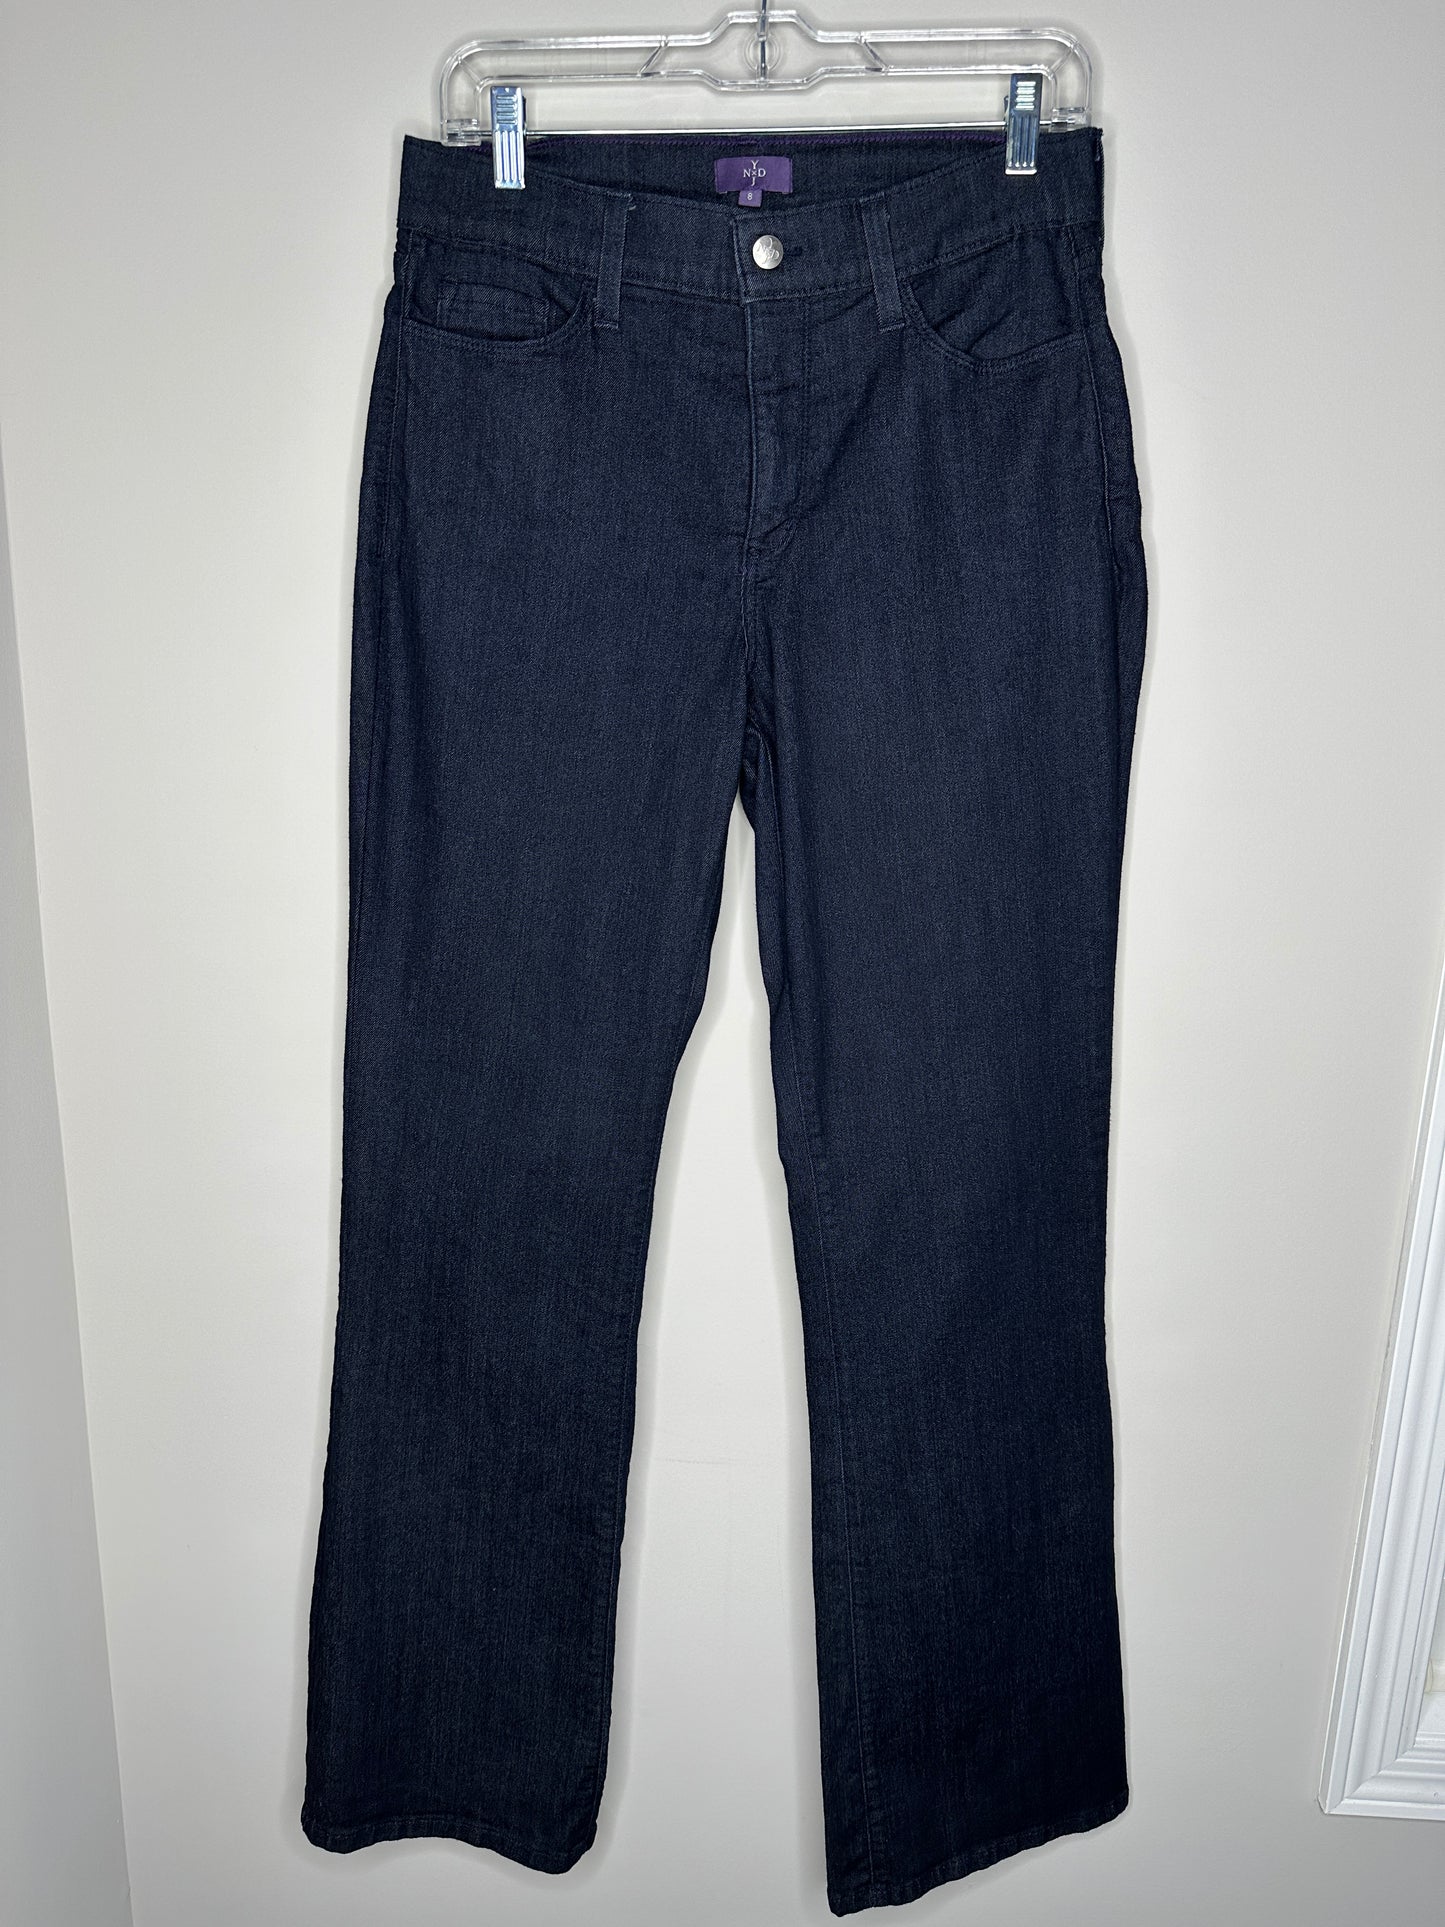 NYDJ Not Your Daughter's Jeans Size 8 Blue Dark Wash Boot Cut Jeans, new/NWOT